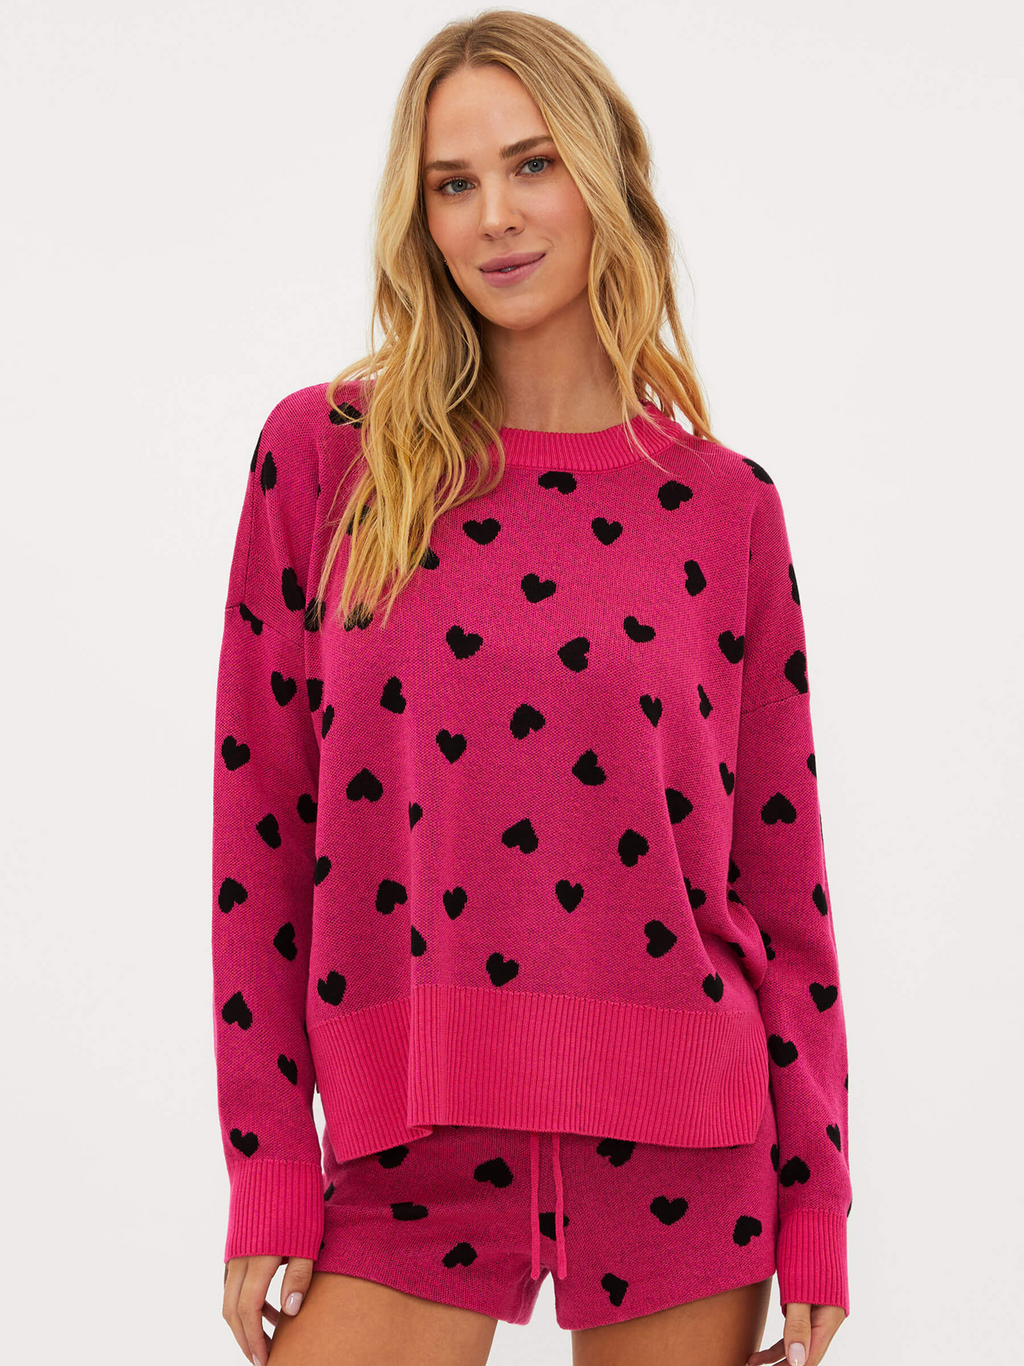 Callie Candy Hearts Sweater